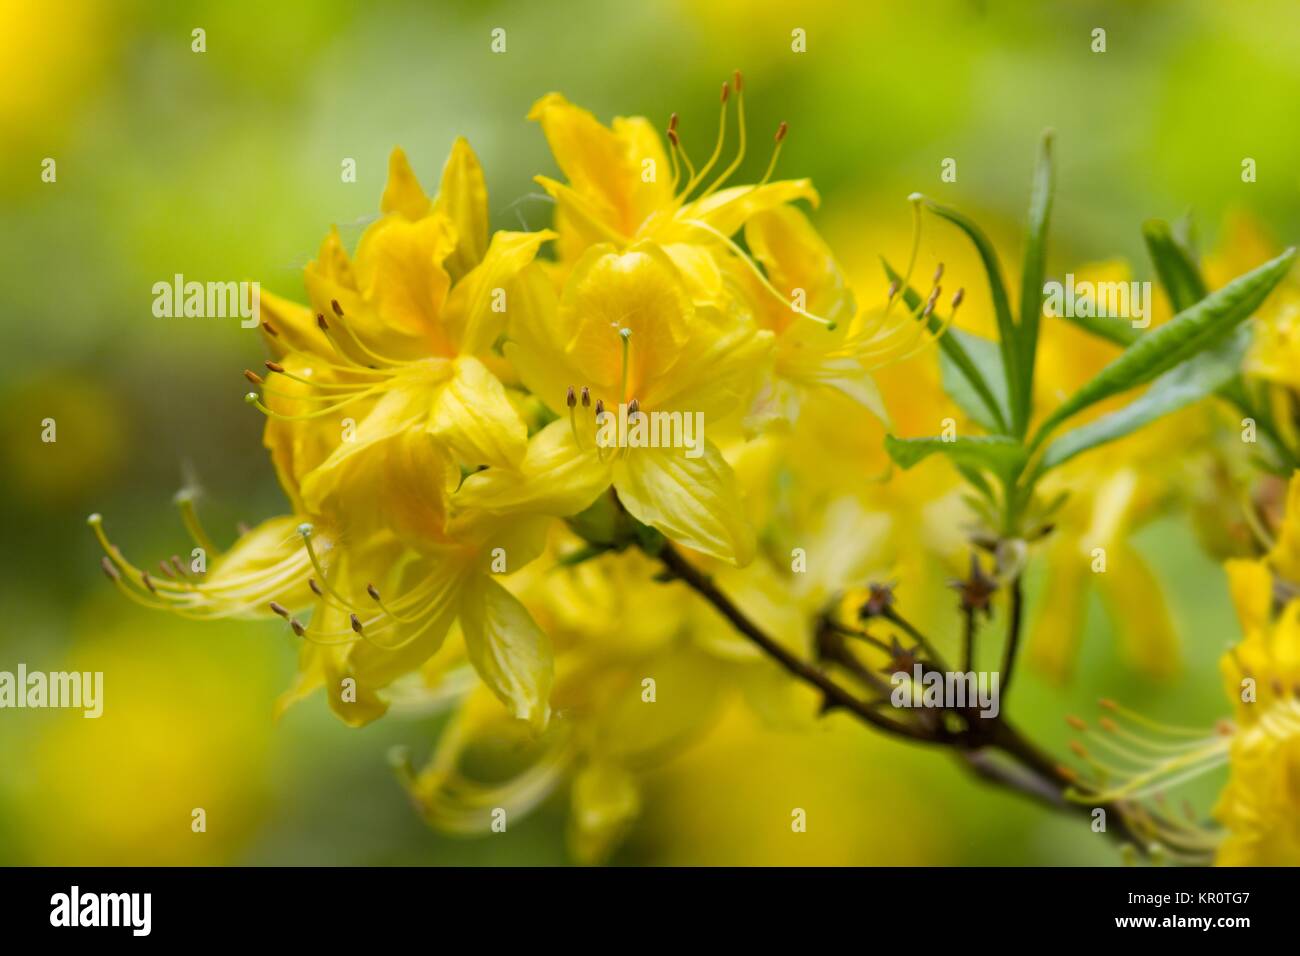 yellow rhododendron flowers / yellow rhododendron blossoms Stock Photo